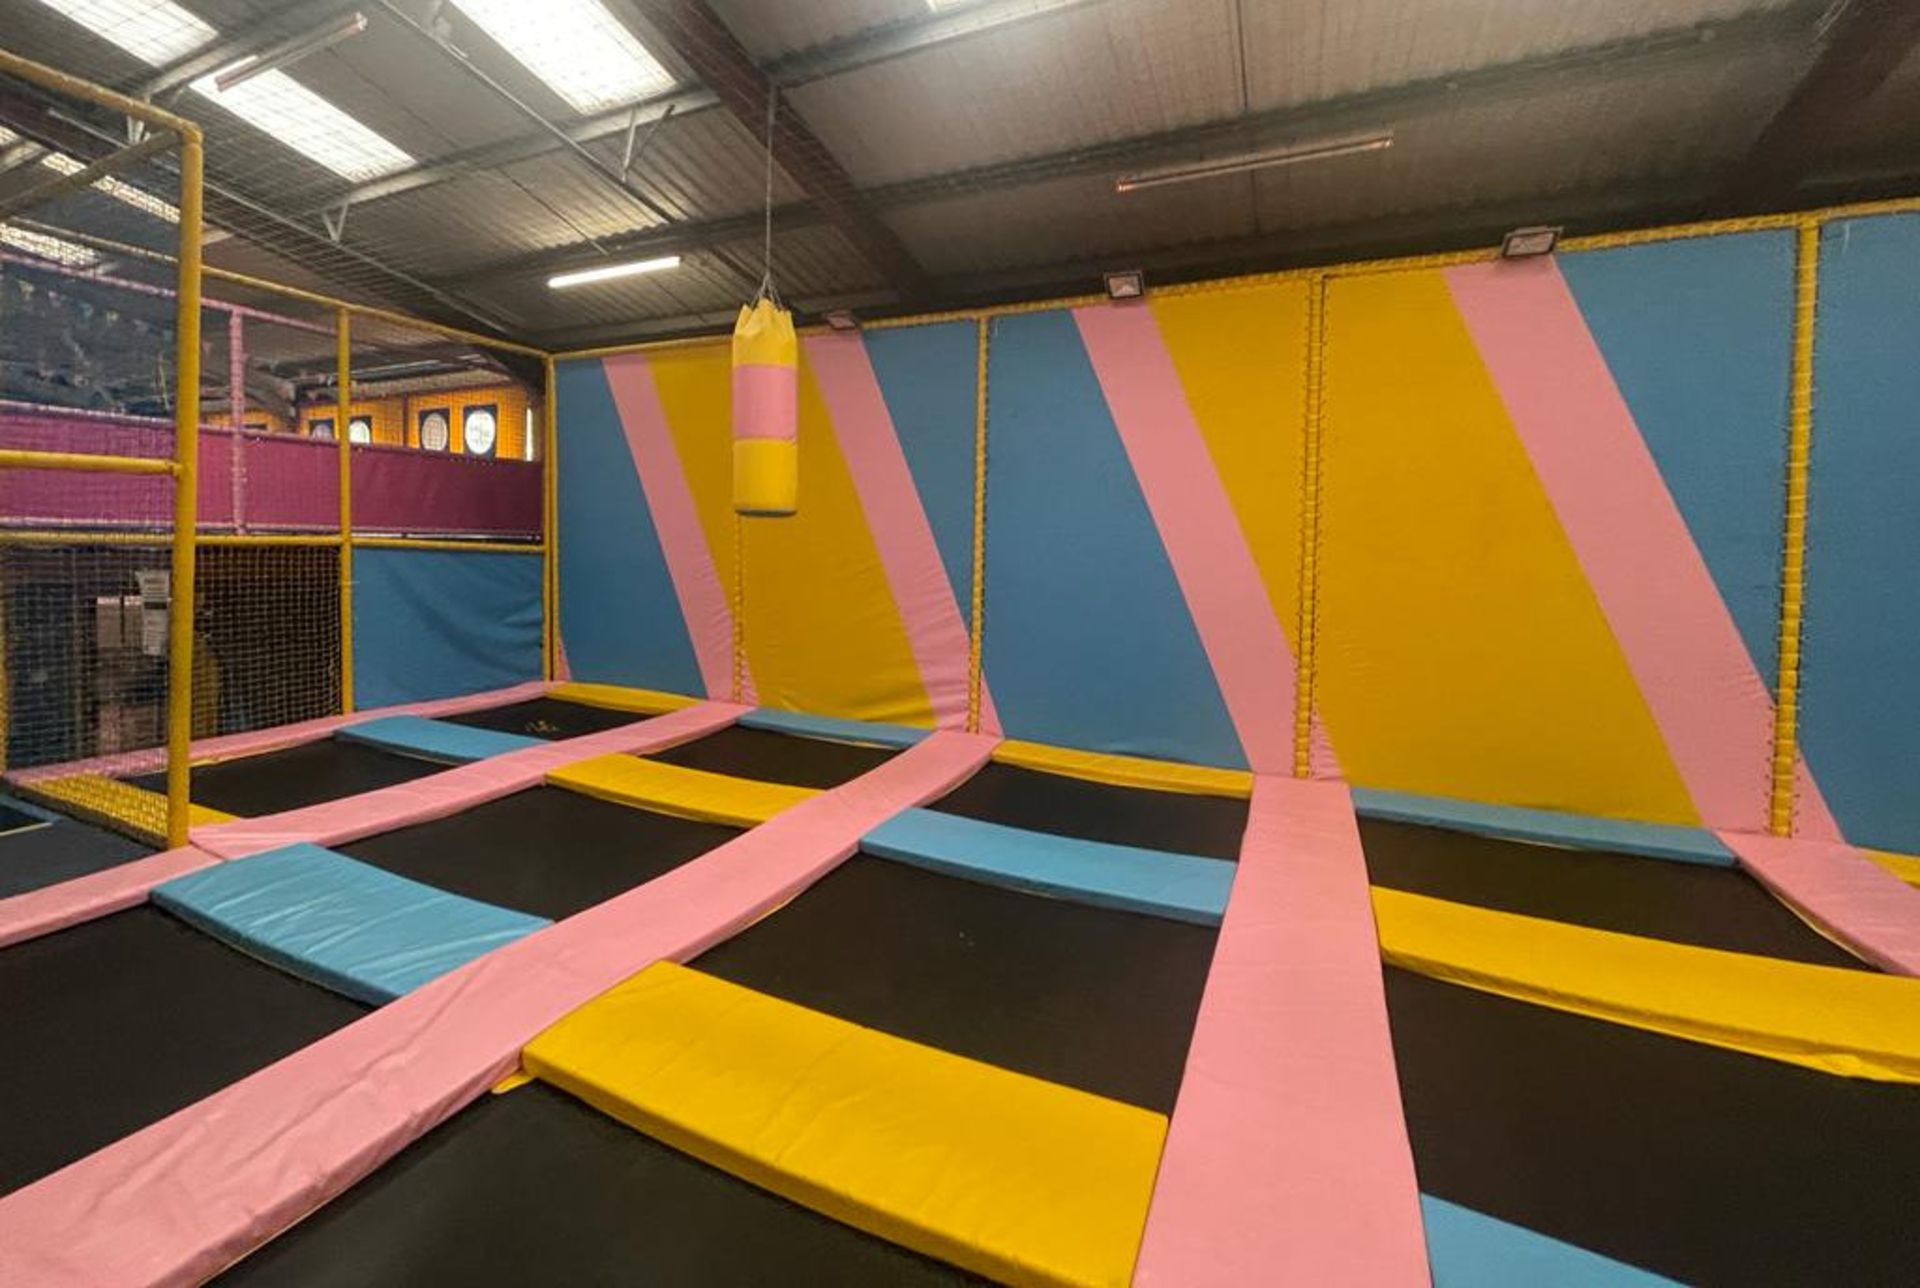 1 x Trampoline Park With Over 40 Interconnected Trampolines, Inflatable Activity Area, Waiting - Image 19 of 99